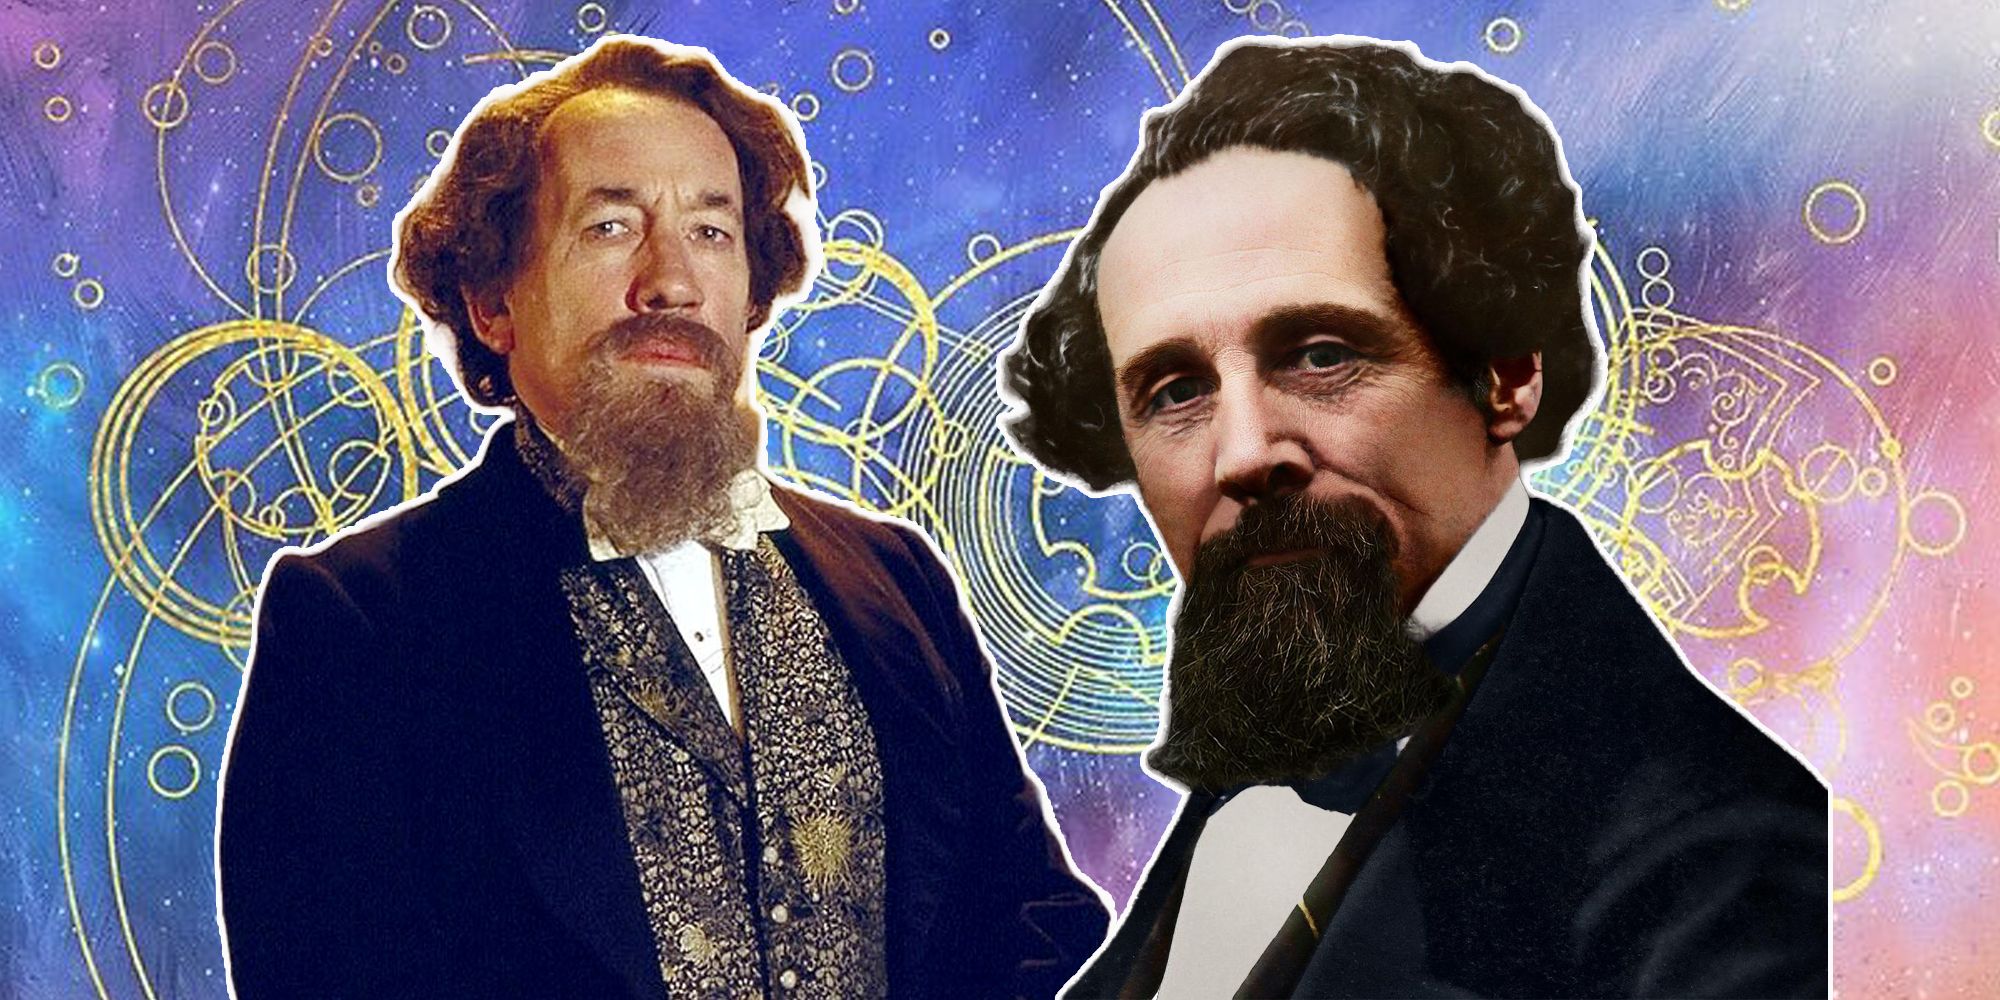 Charles Dickens (Simon Callow) appeared in his regular timeline and an alternate universe